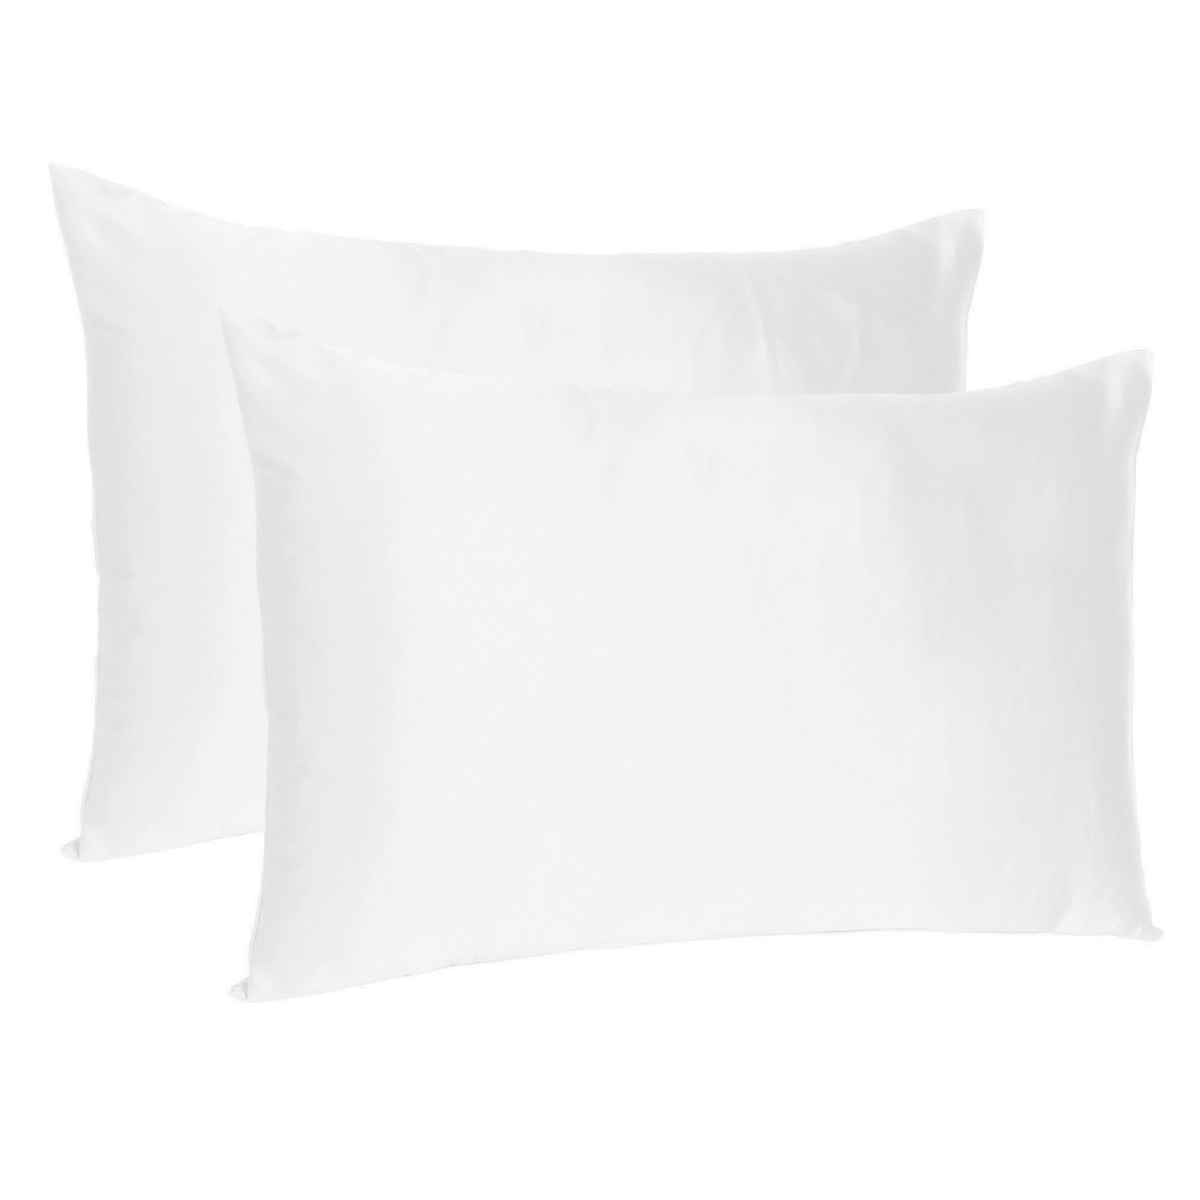 Gfancy Fixtures 20 x 40 in. White Dreamy Silky Satin King Size Pillowcases